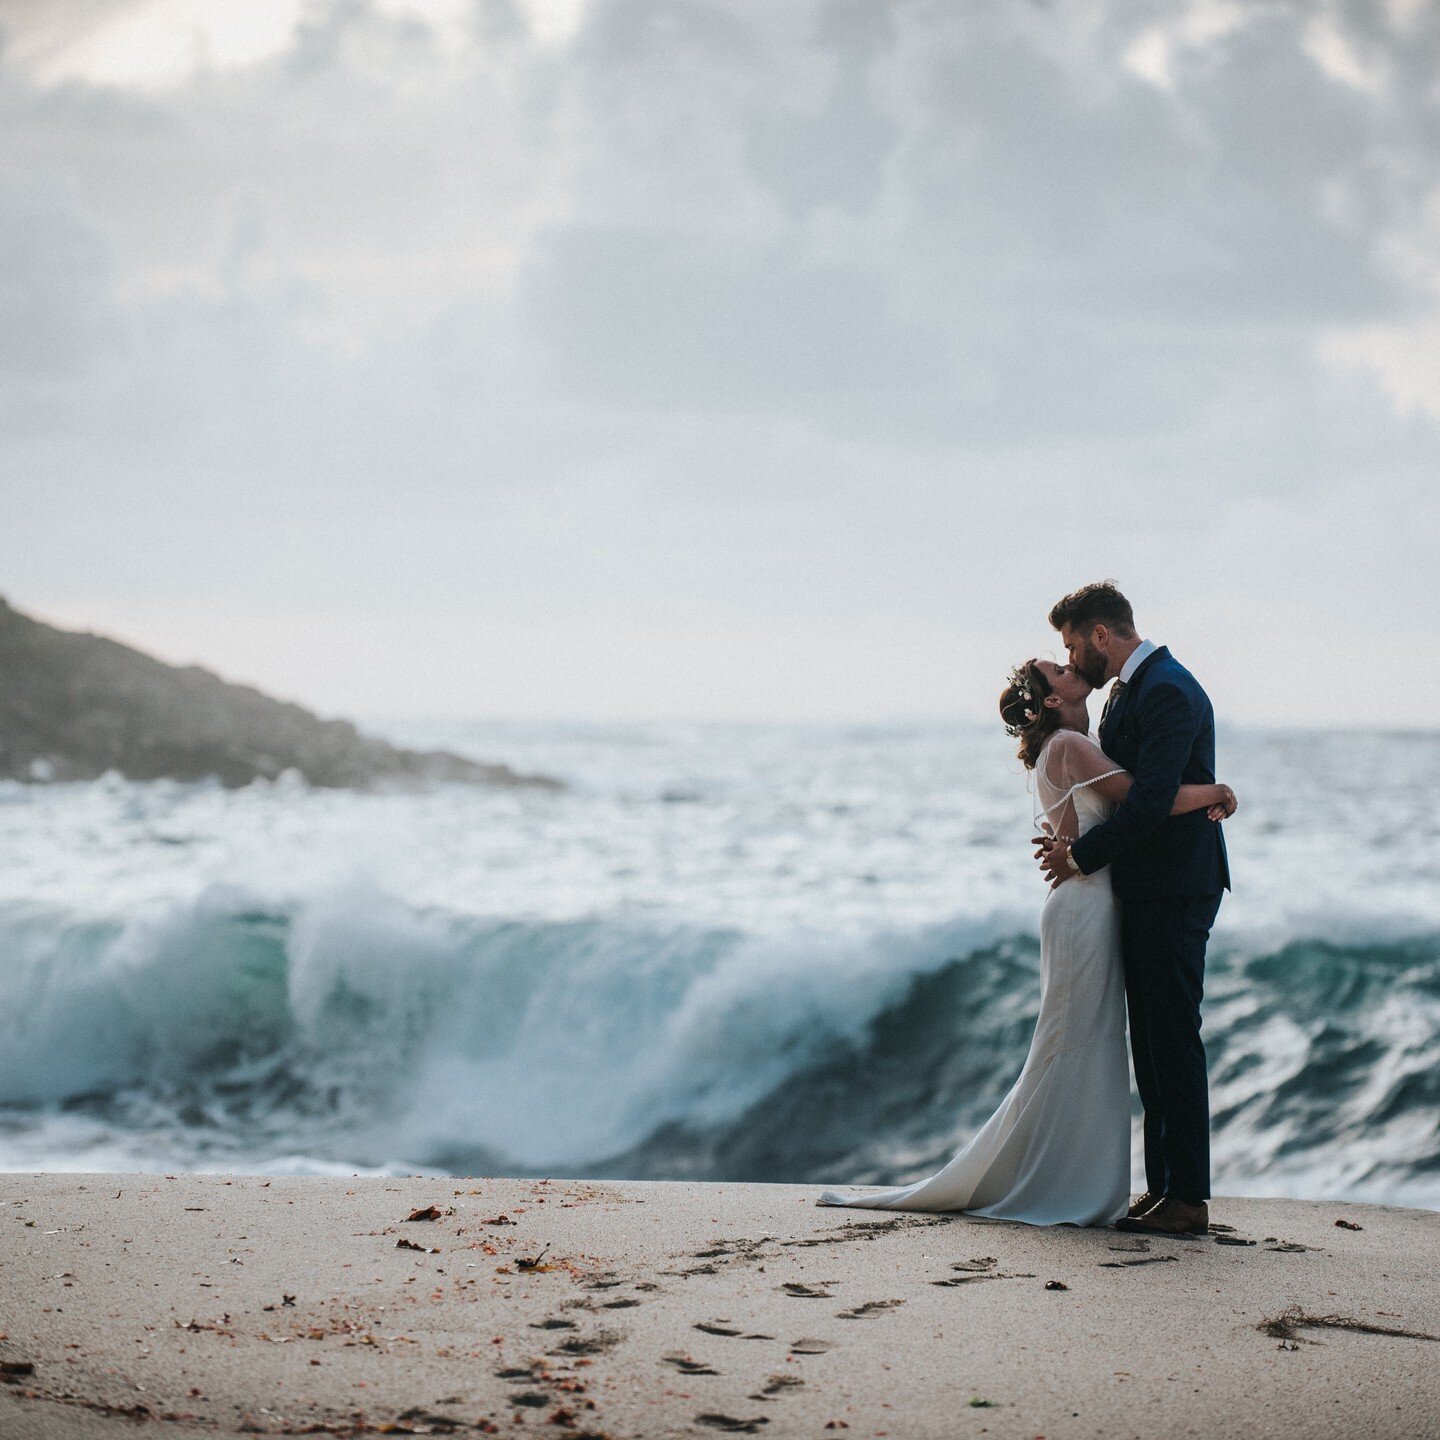 10 from Portheras Cove, Cornwall 🌊@chyprazeweddingbarn #portherascove #cornwallwedding #cornwallweddingphotographer #weddingphotographer #coastalwedding